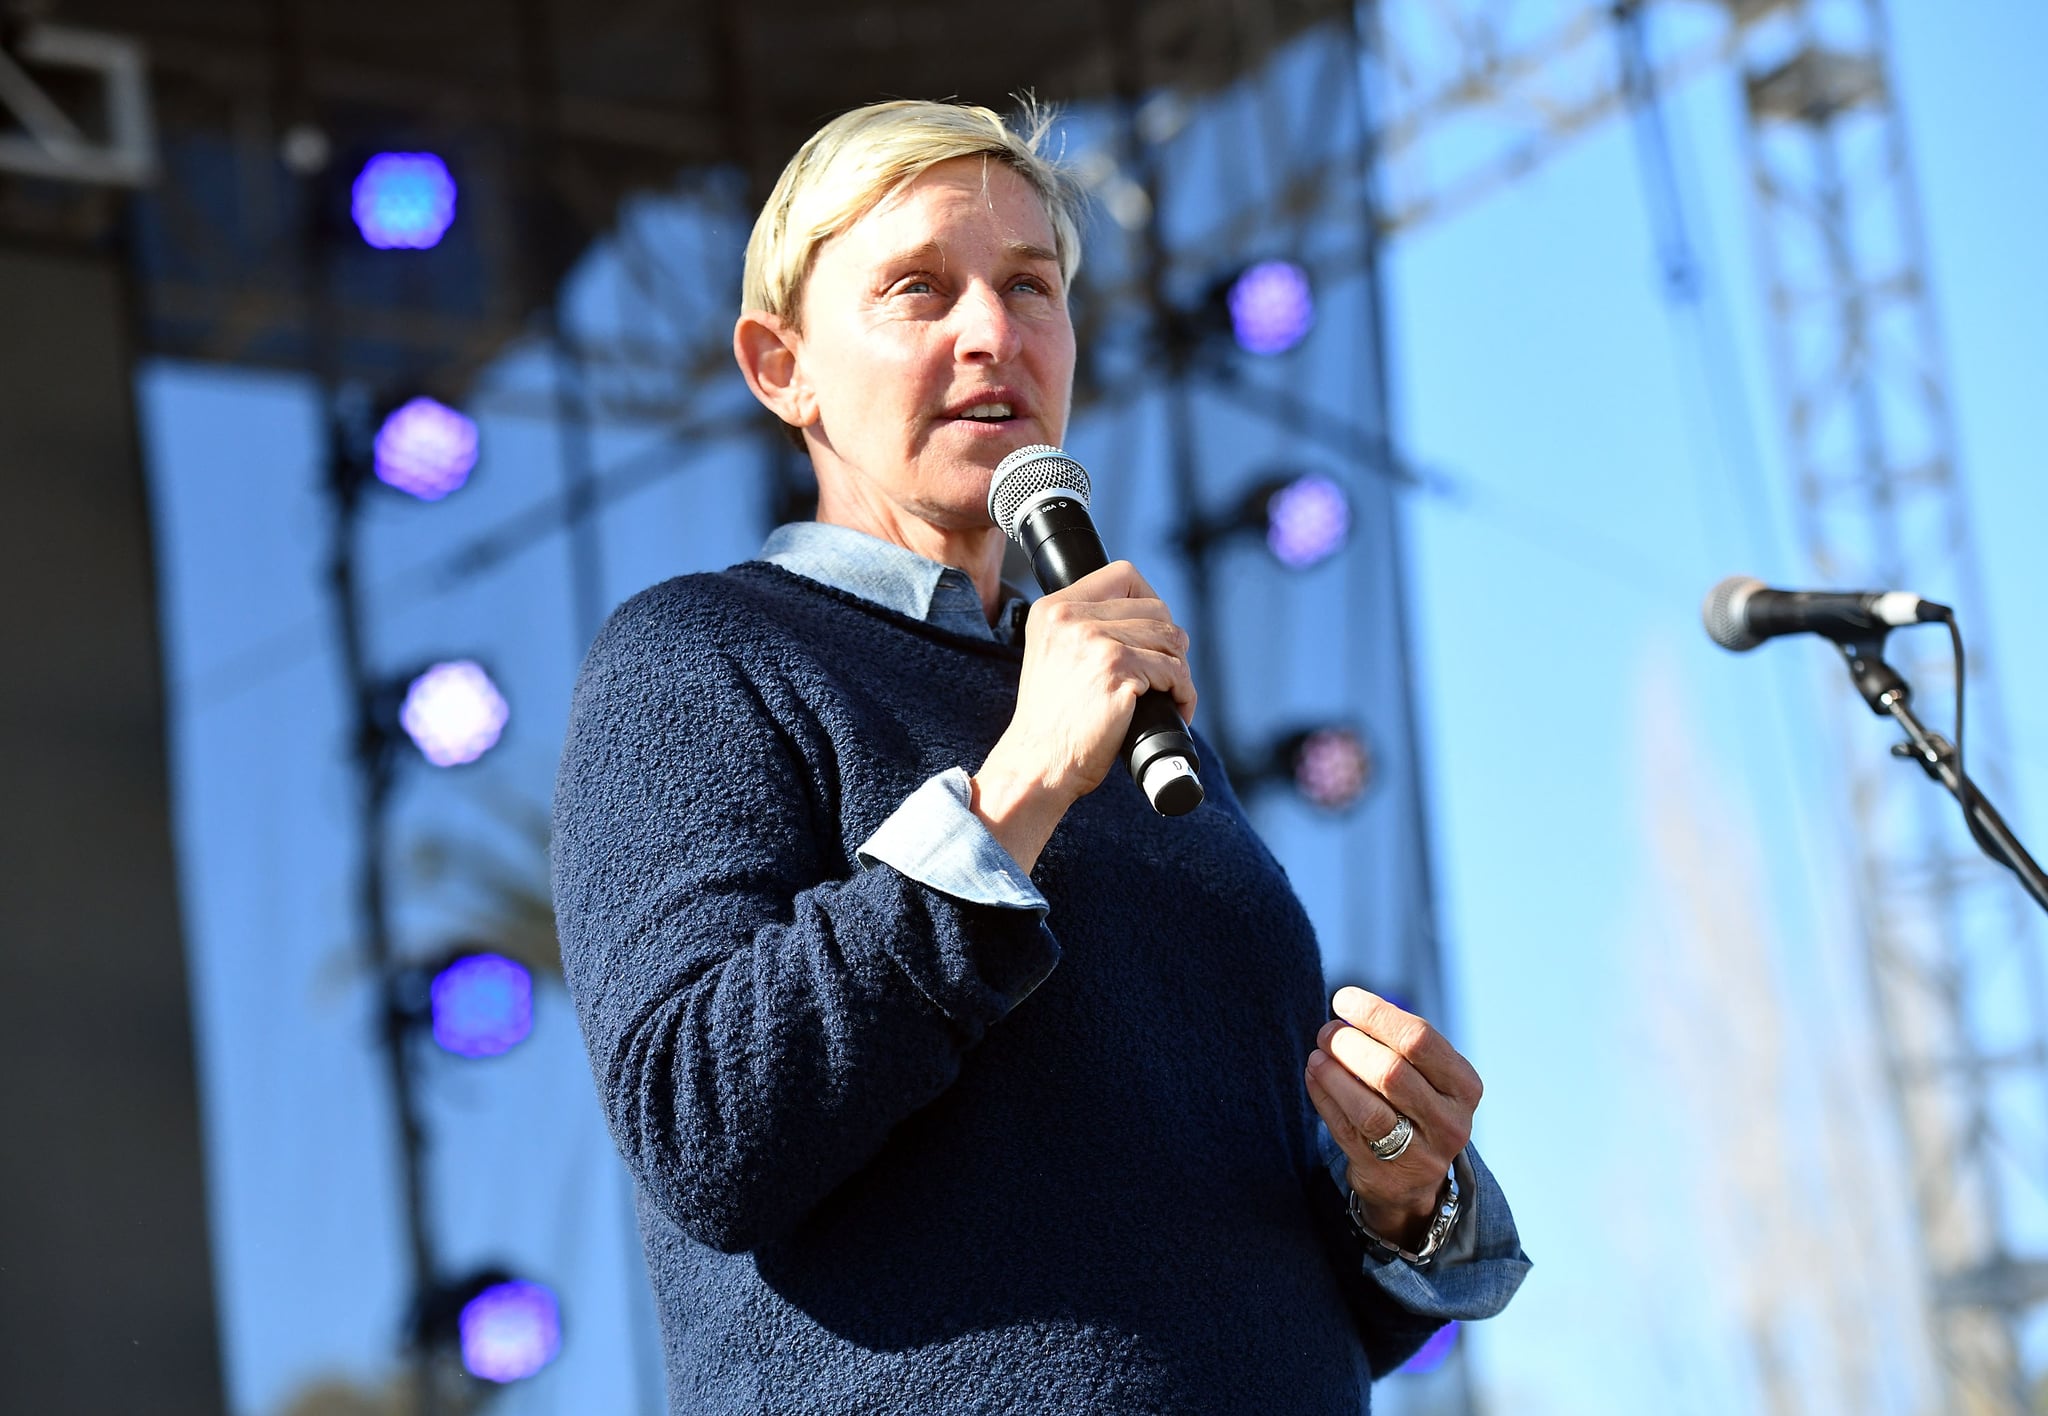 CARPINTERIA, CA - FEBRUARY 25:  TV personality Ellen DeGeneres performs onstage during the One 805 Kick Ash Bash benefiting First Responders at Bella Vista Ranch & Polo Club on February 25, 2018 in Carpinteria, California.  (Photo by Scott Dudelson/Getty Images)